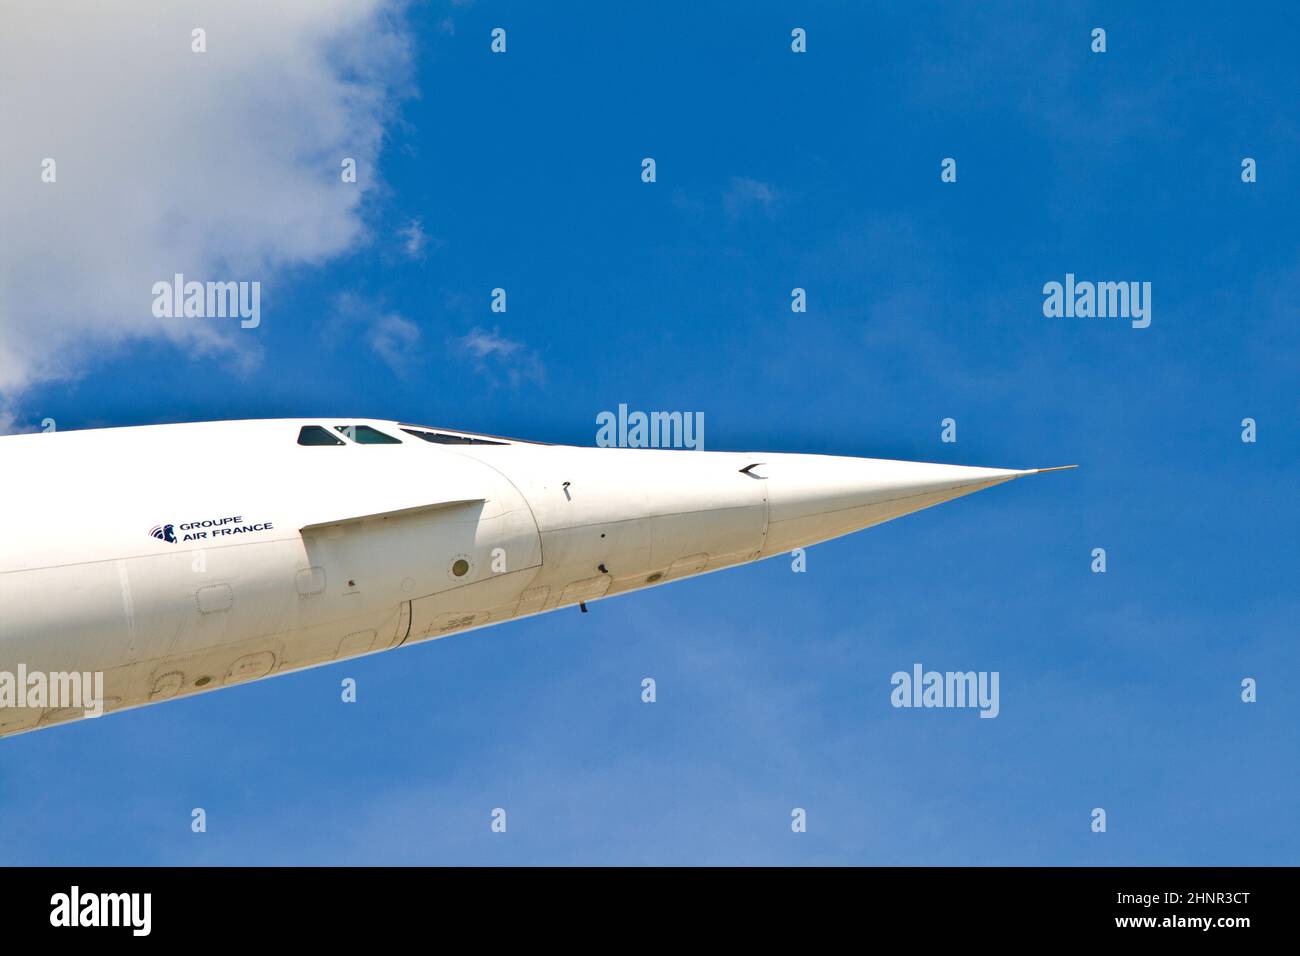 Sinsheim Museum High Resolution Stock Photography and Images - Alamy